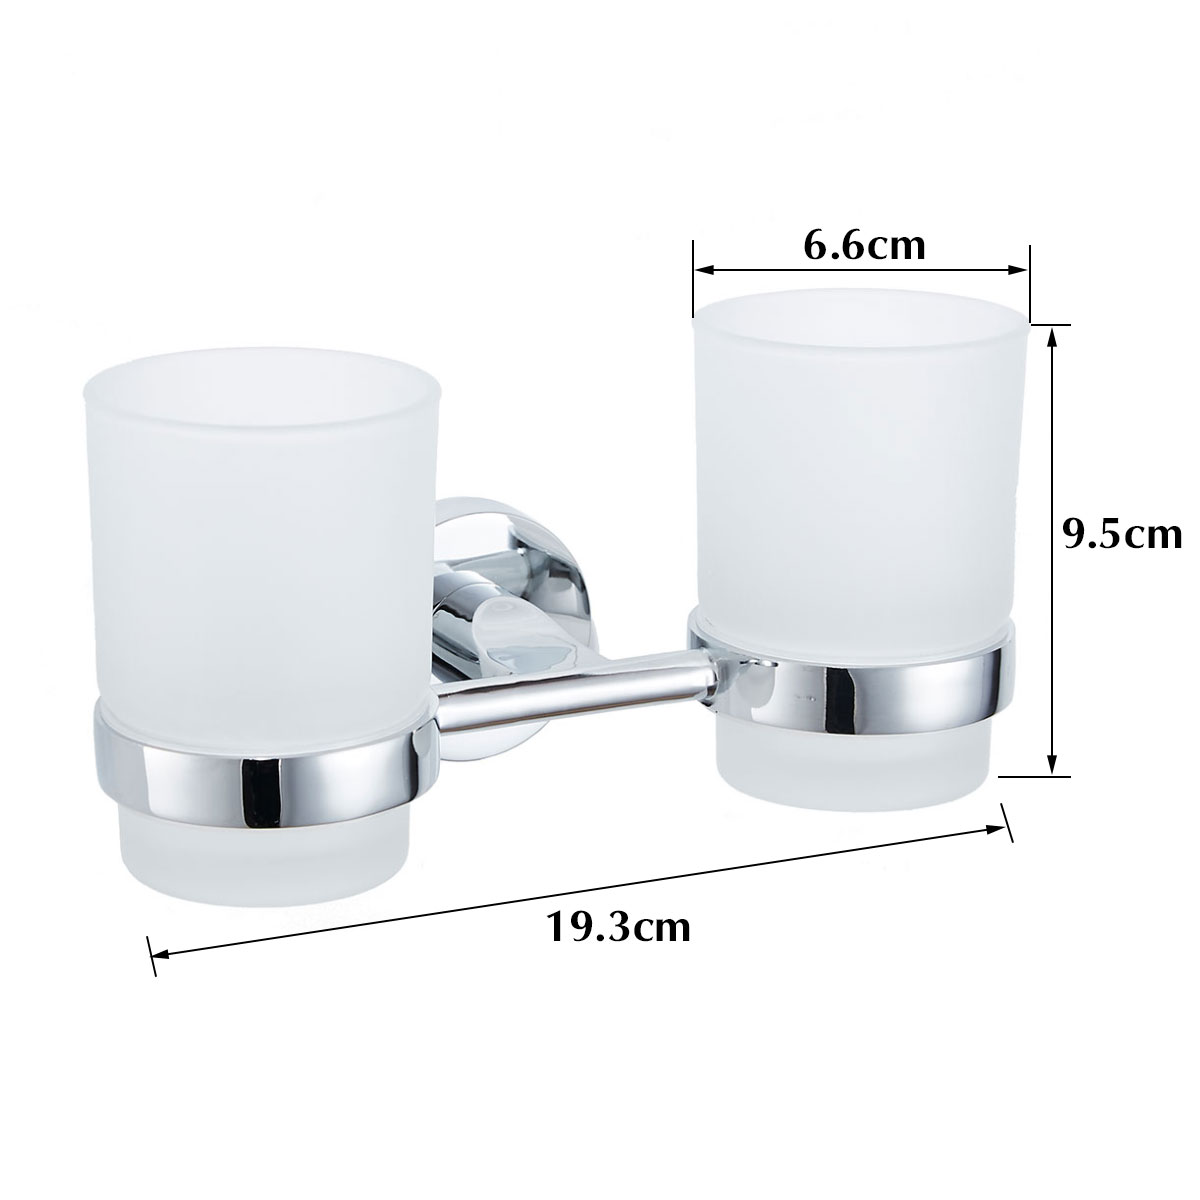 SingleDouble-Tumbler-Cup-Stainless-Steel-Toothbrush-Cup-Holder-Wall-Mounted-Toothbrush-Storage-for-B-1690420-9